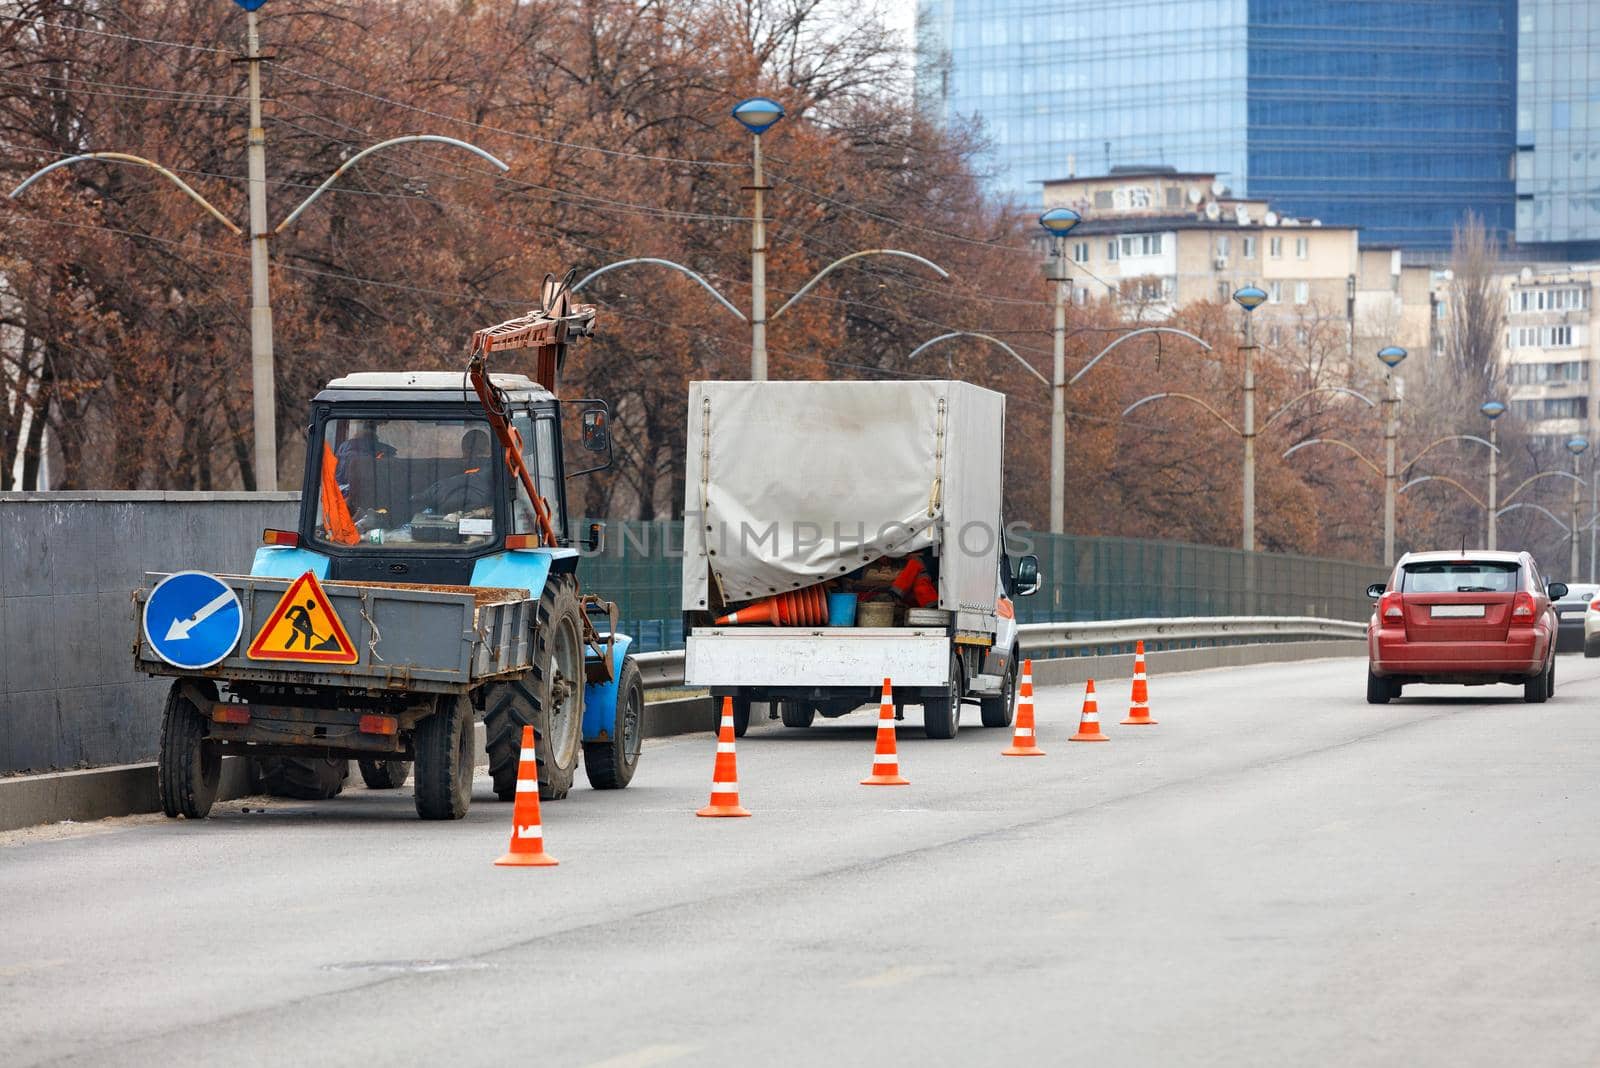 A team of road service workers on a spring day enclose a section of the road with orange cones using an old tractor and truck to clean the side of the road, copy space.